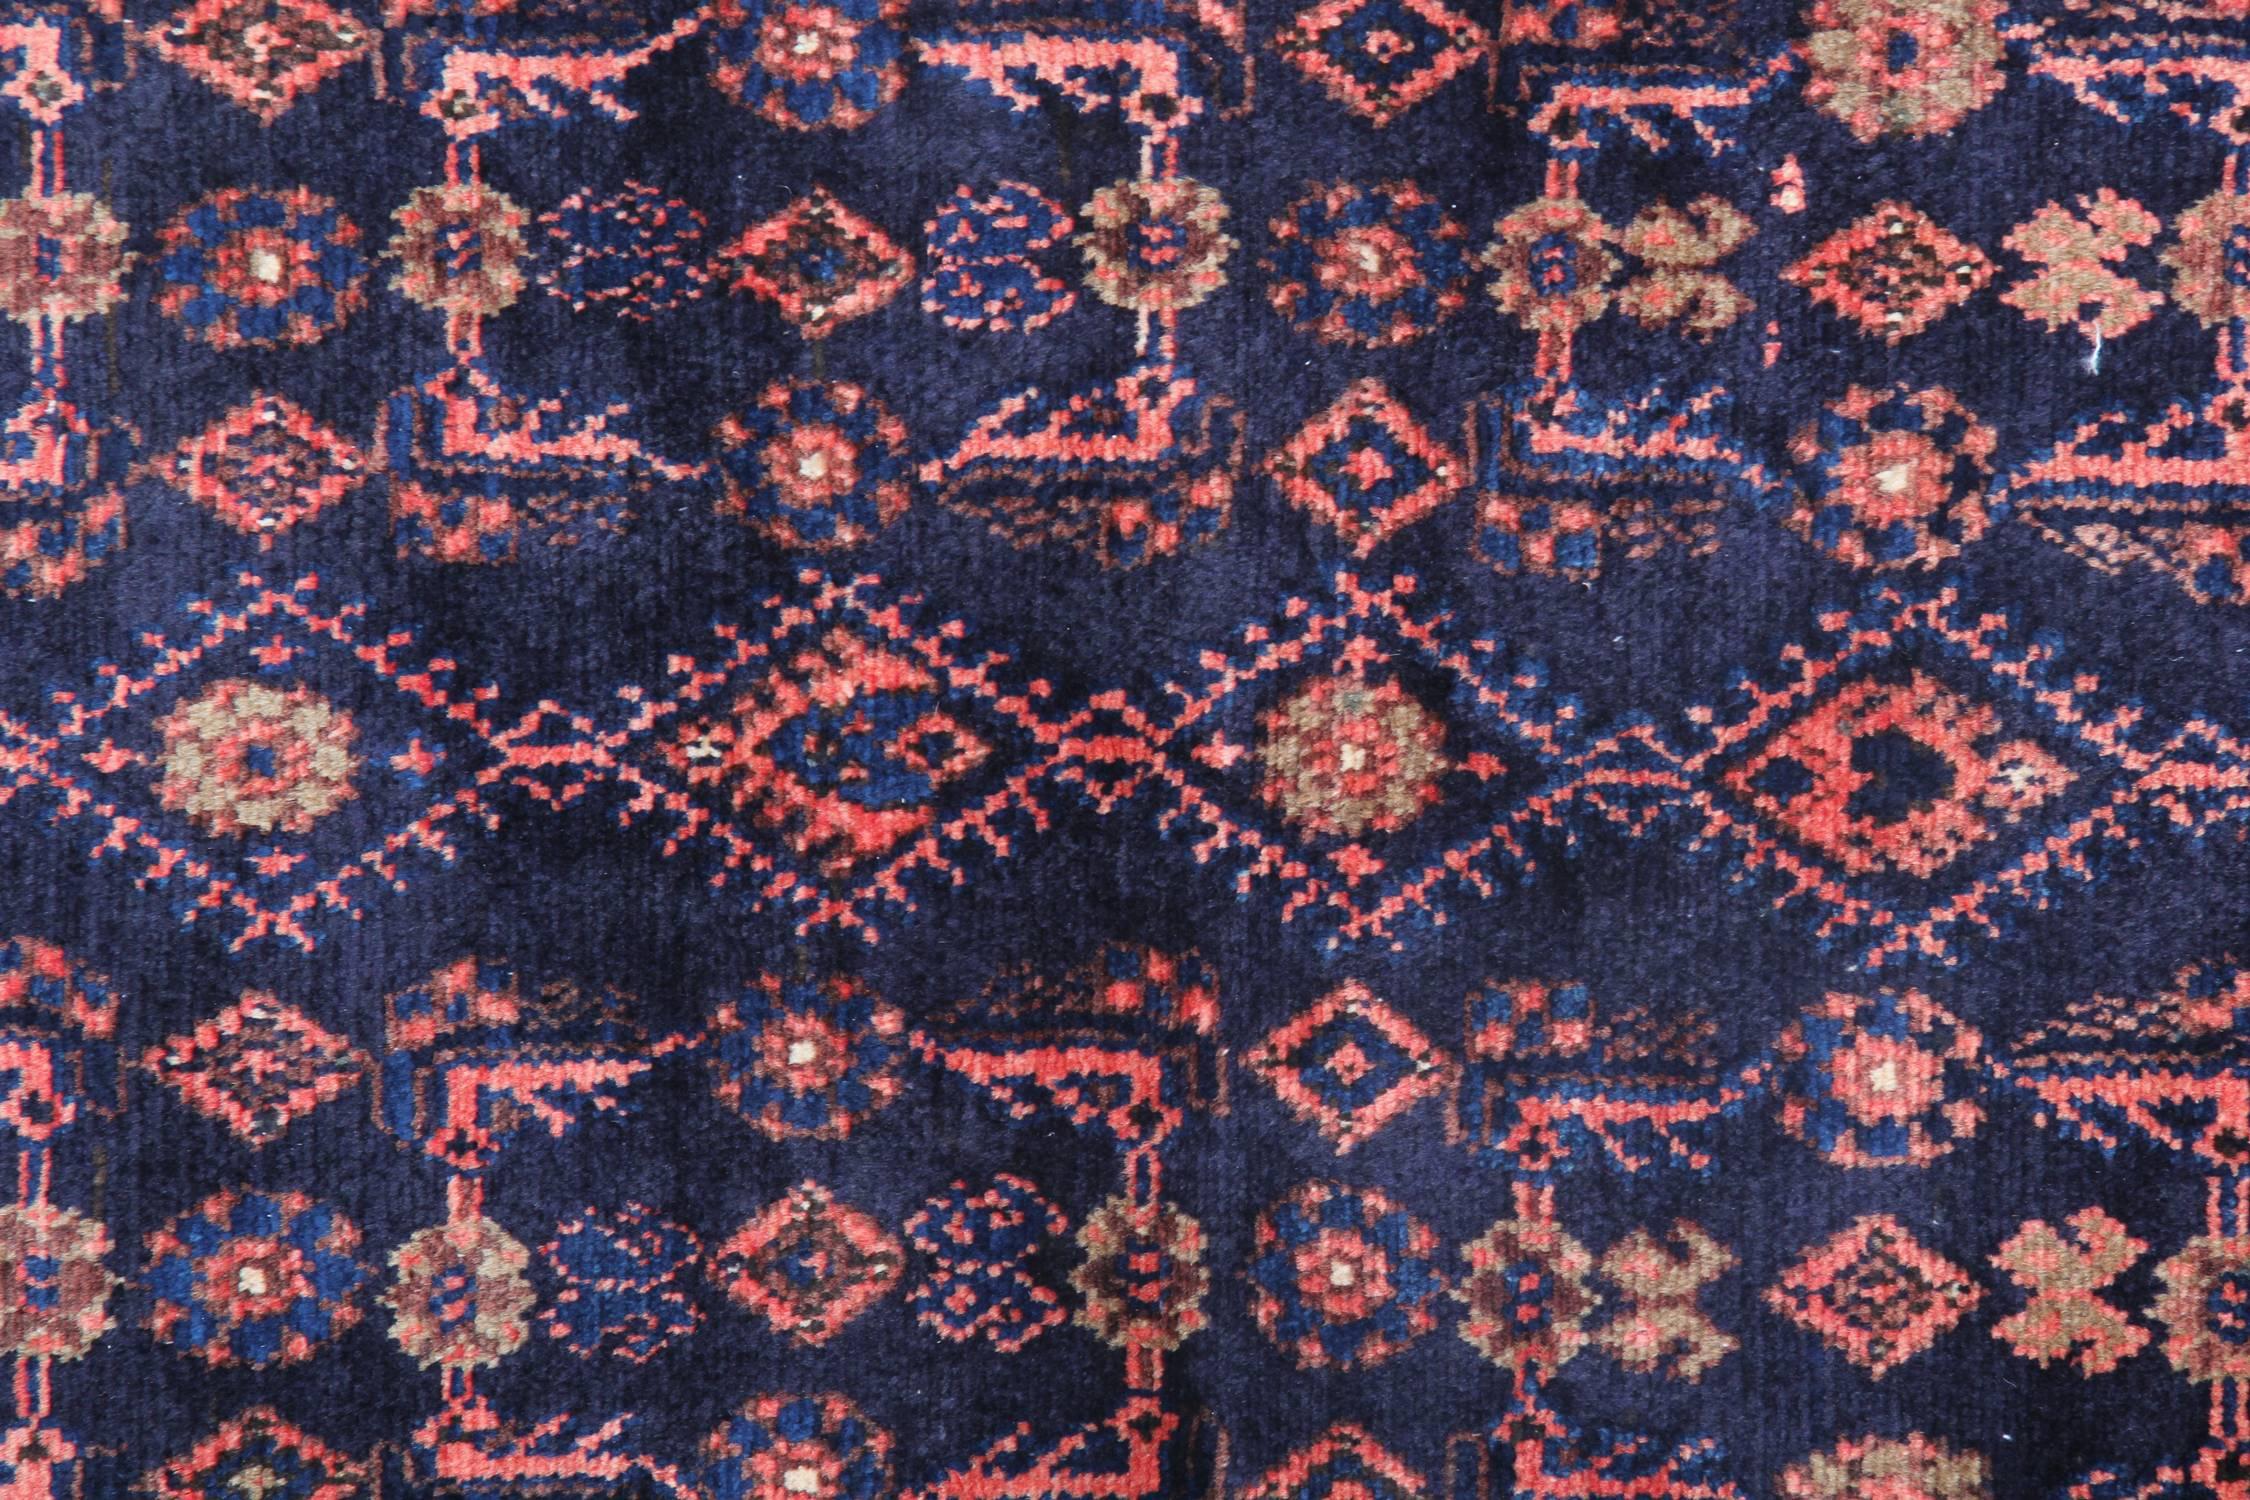 This elegant tribal rug was woven by hand with fine locally sourced materials and a fantastic design. The asymmetrical pattern has been intricately woven on a deep blue background with rich red and pink accents. A decorative border then frames this.